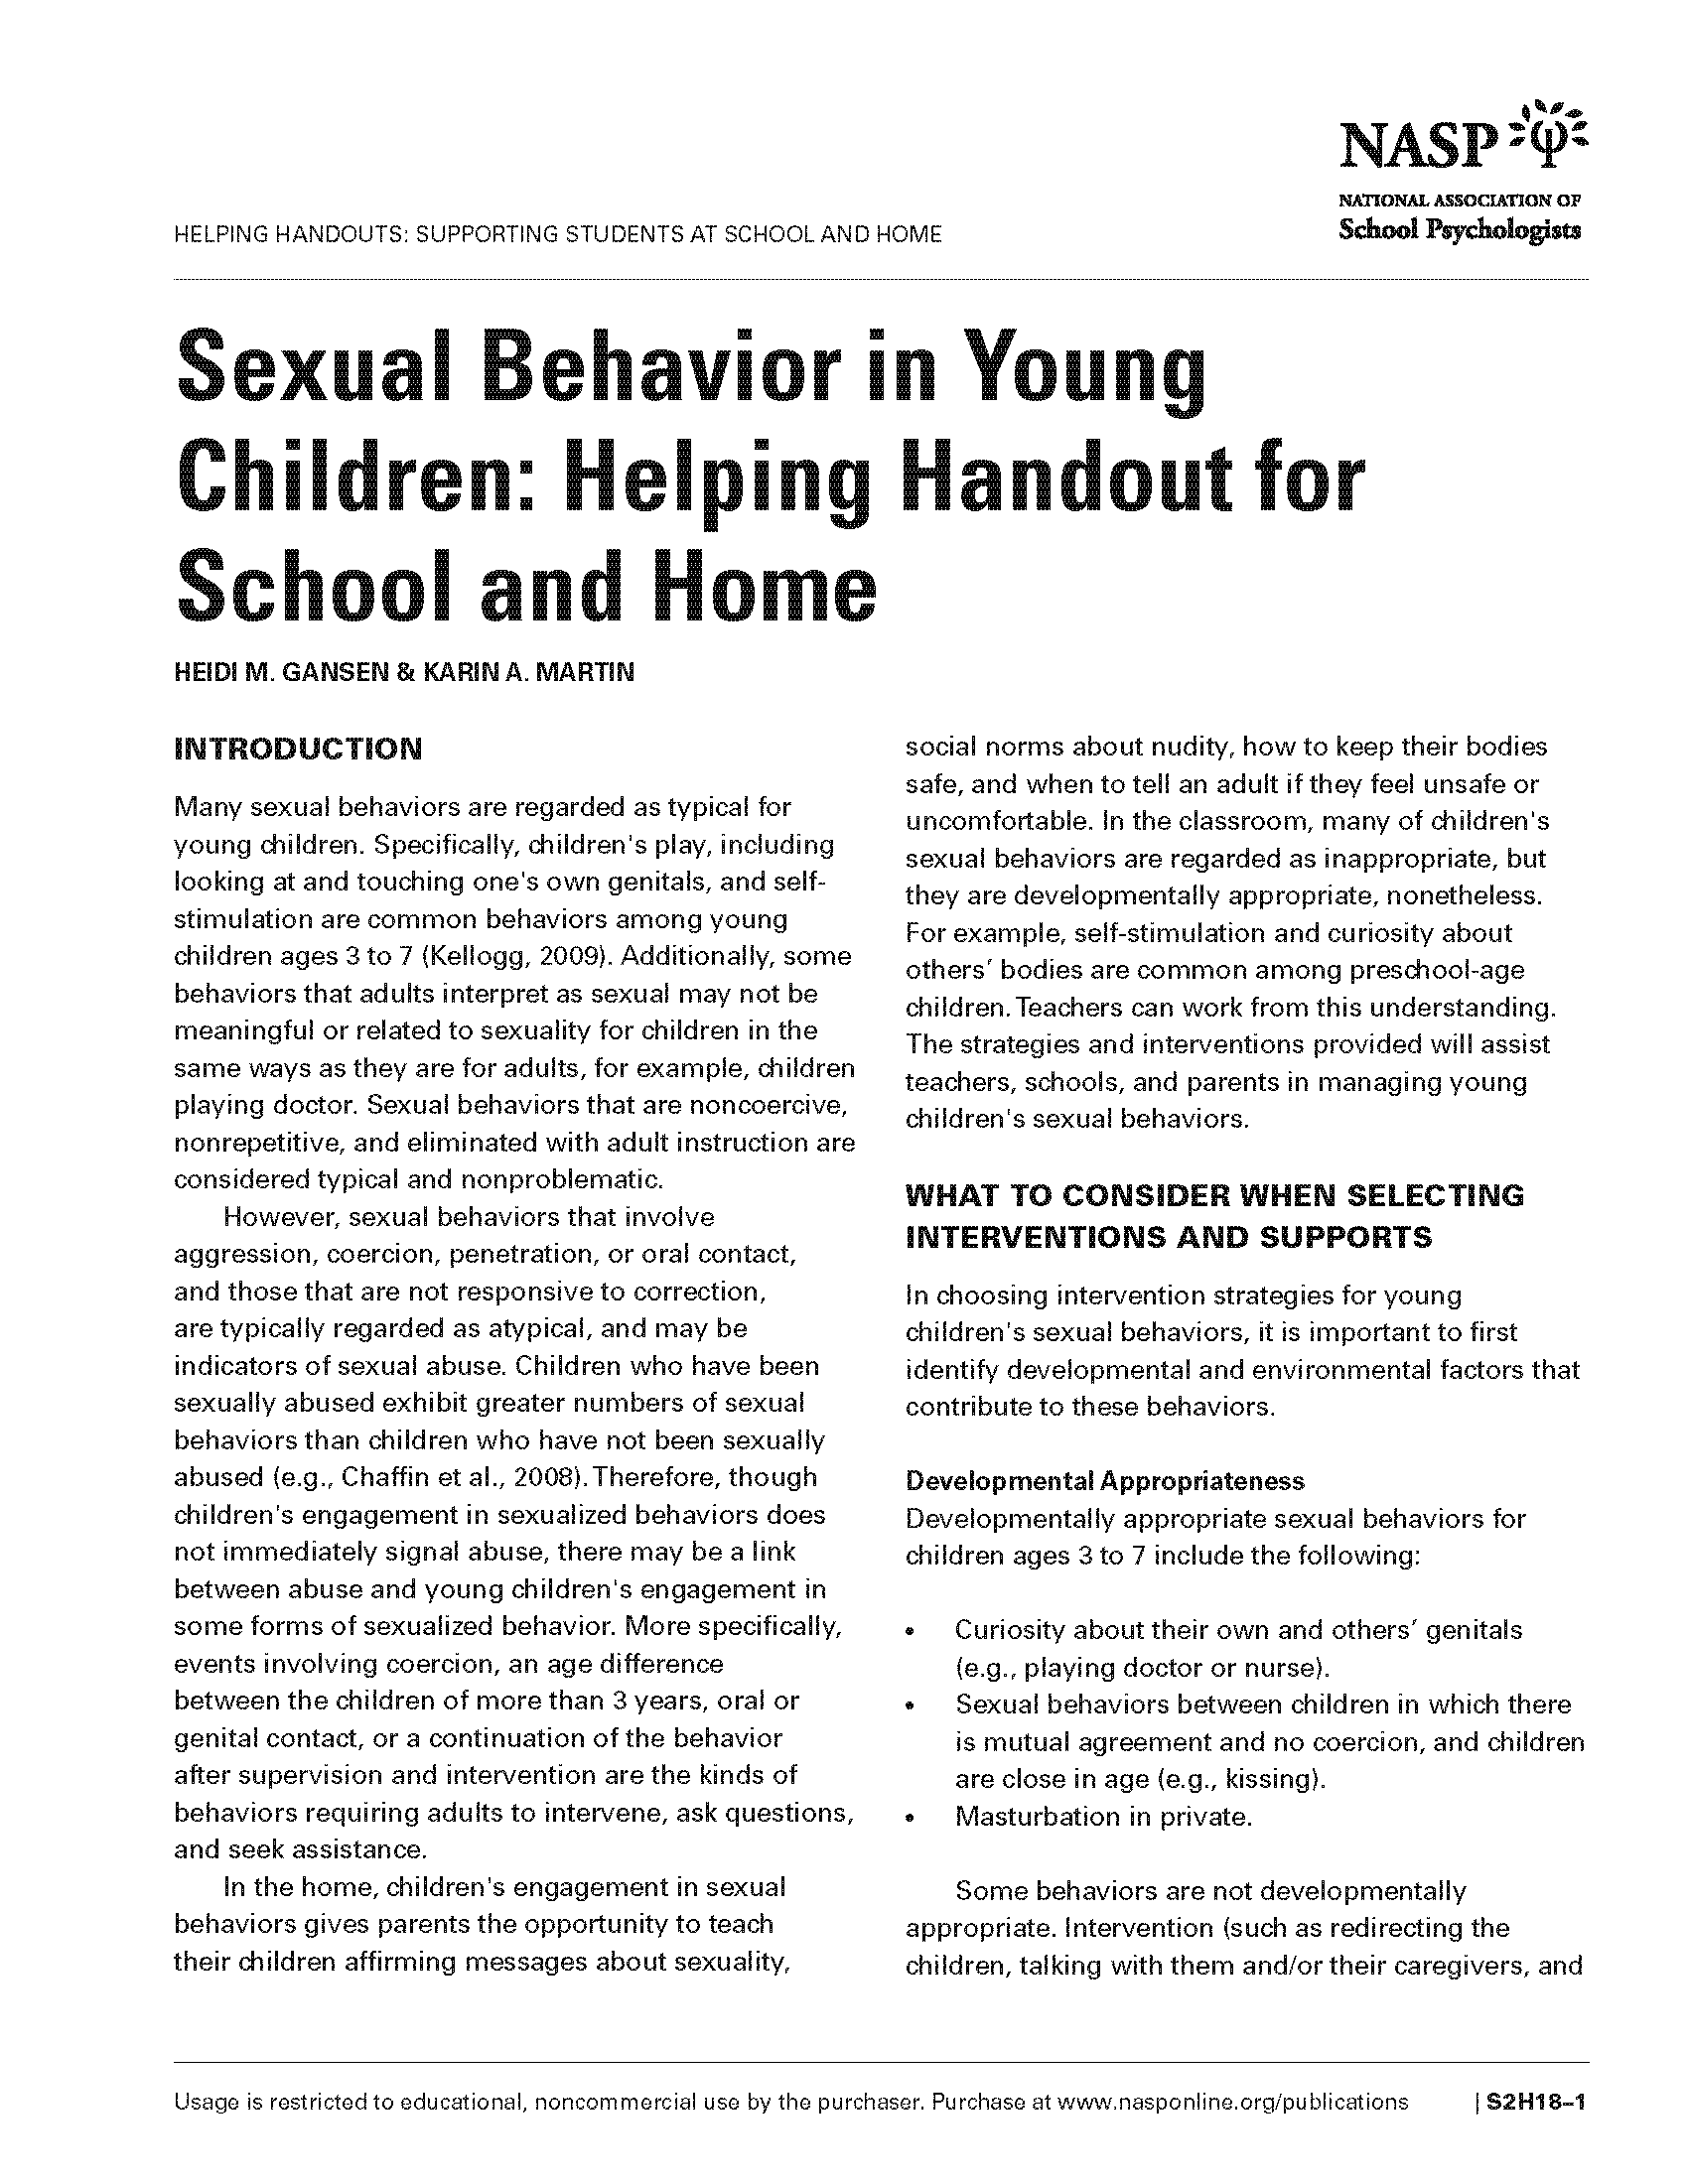 Sexual Behavior in Young Children: Helping Handout for School and Home 